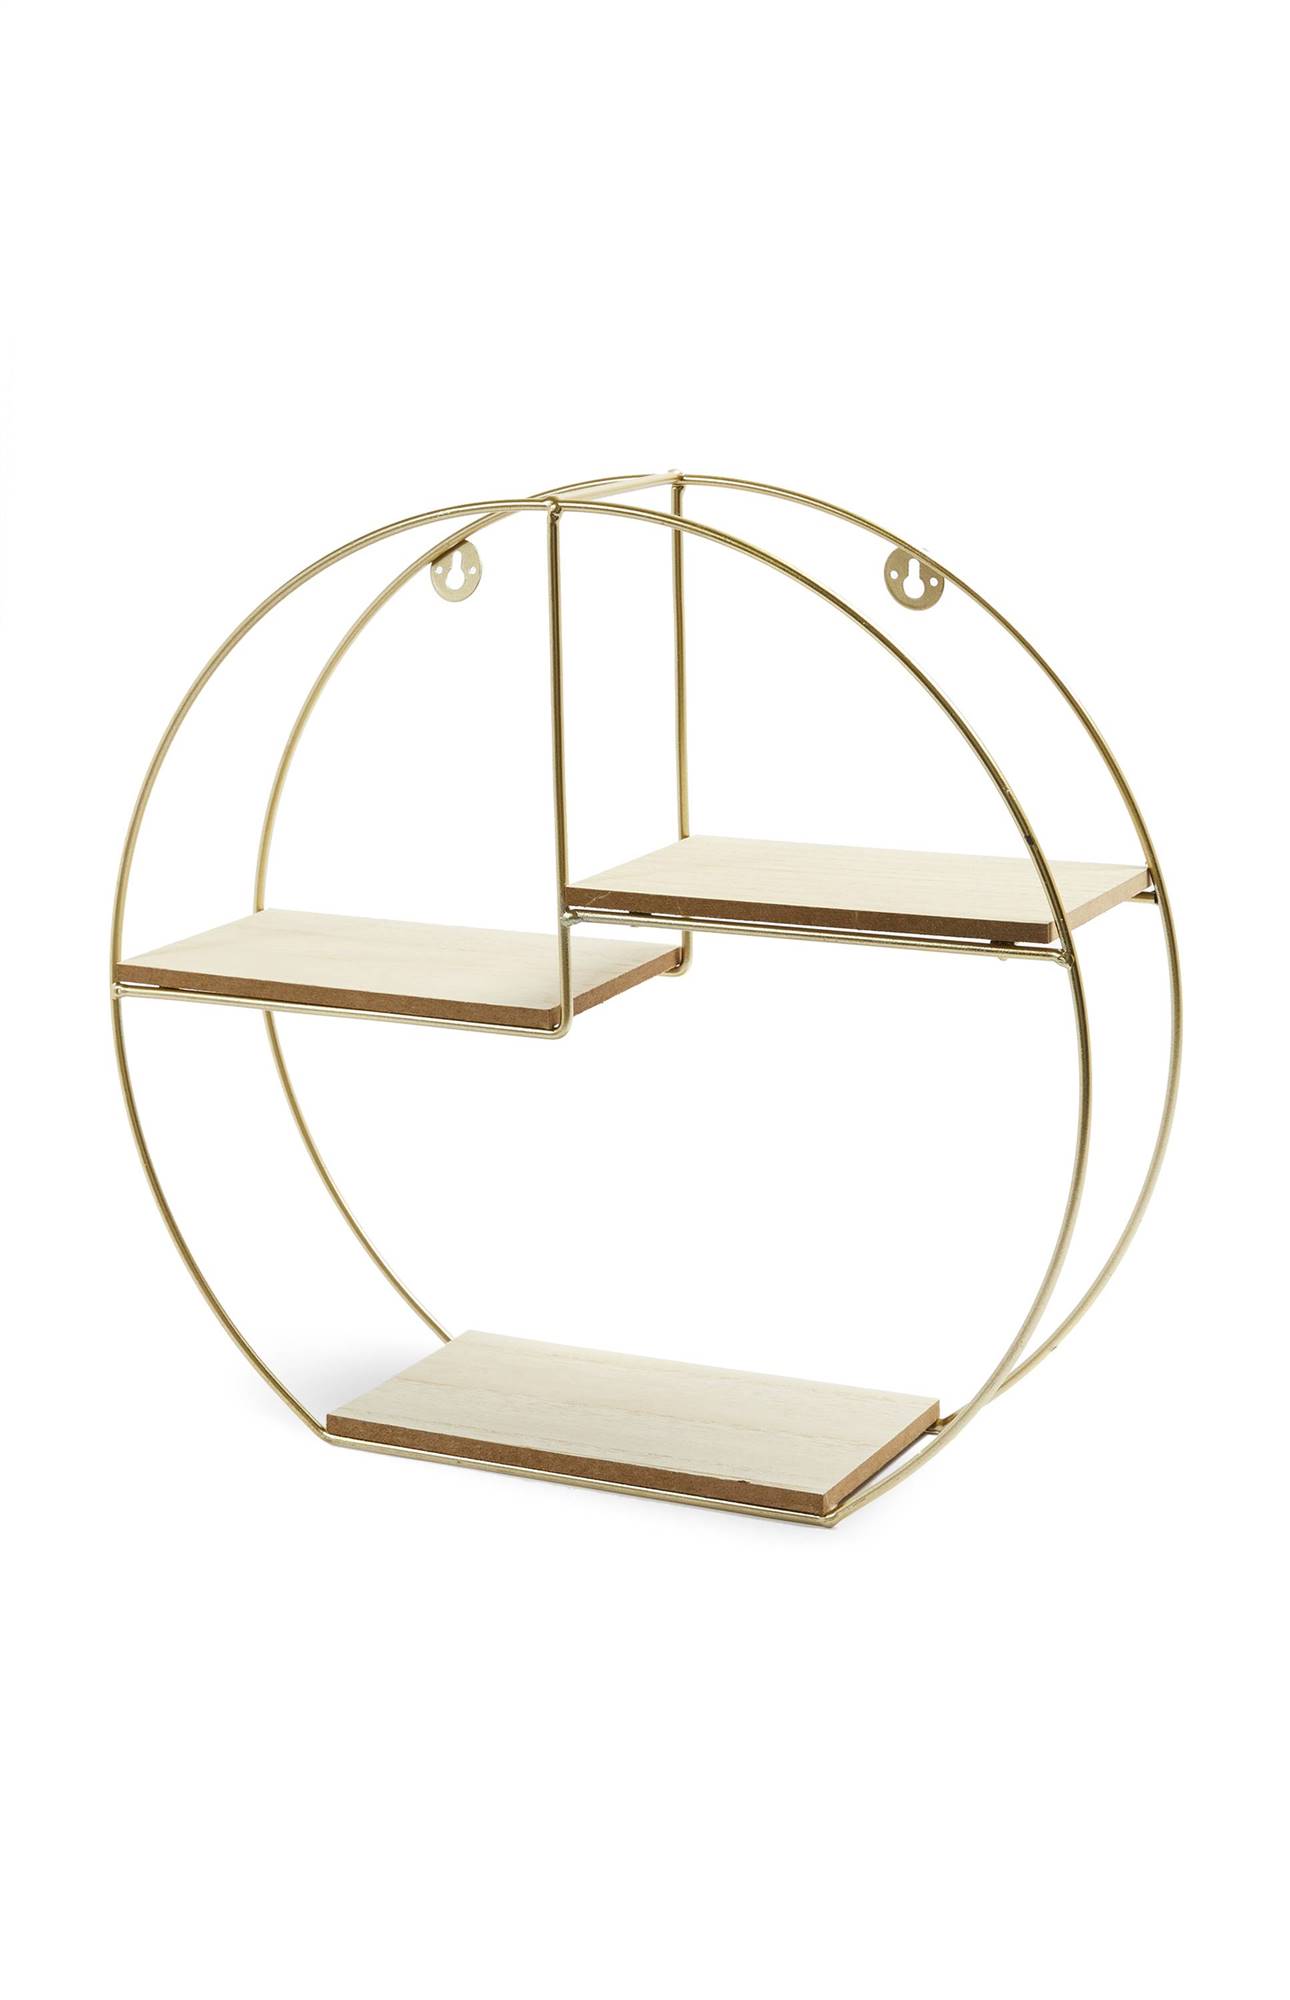 KIMBALL-1609001-01-Gold Wire Grid Shelves £6 €7 8 PLN30